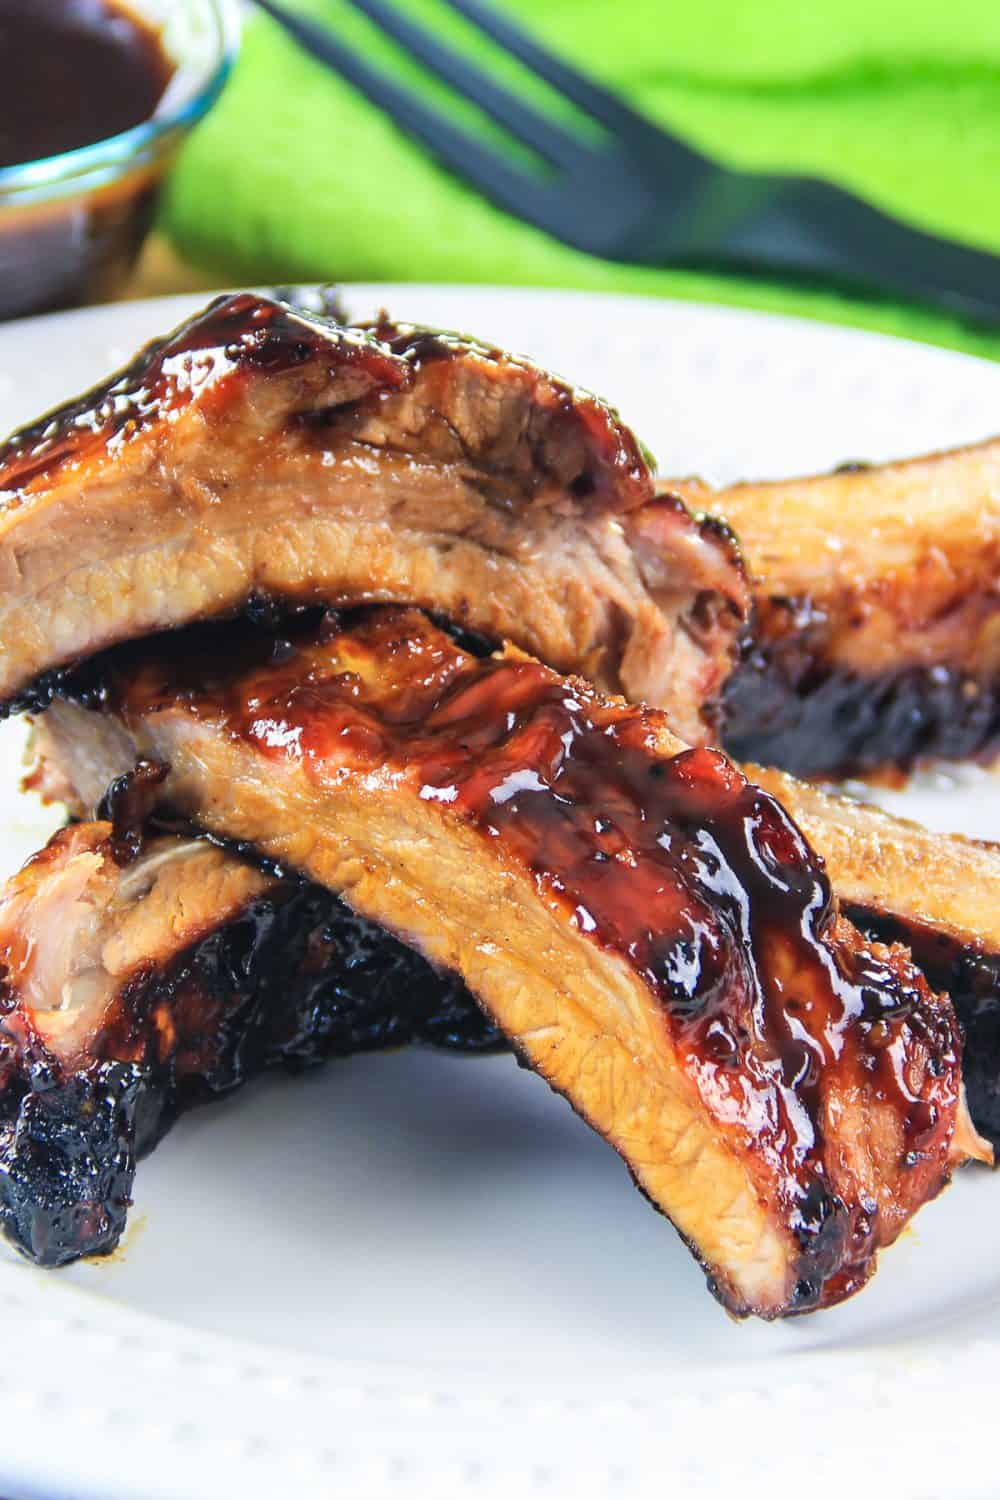 Barbecue Pork Ribs Simply Home Cooked,What Are Potstickers Served With